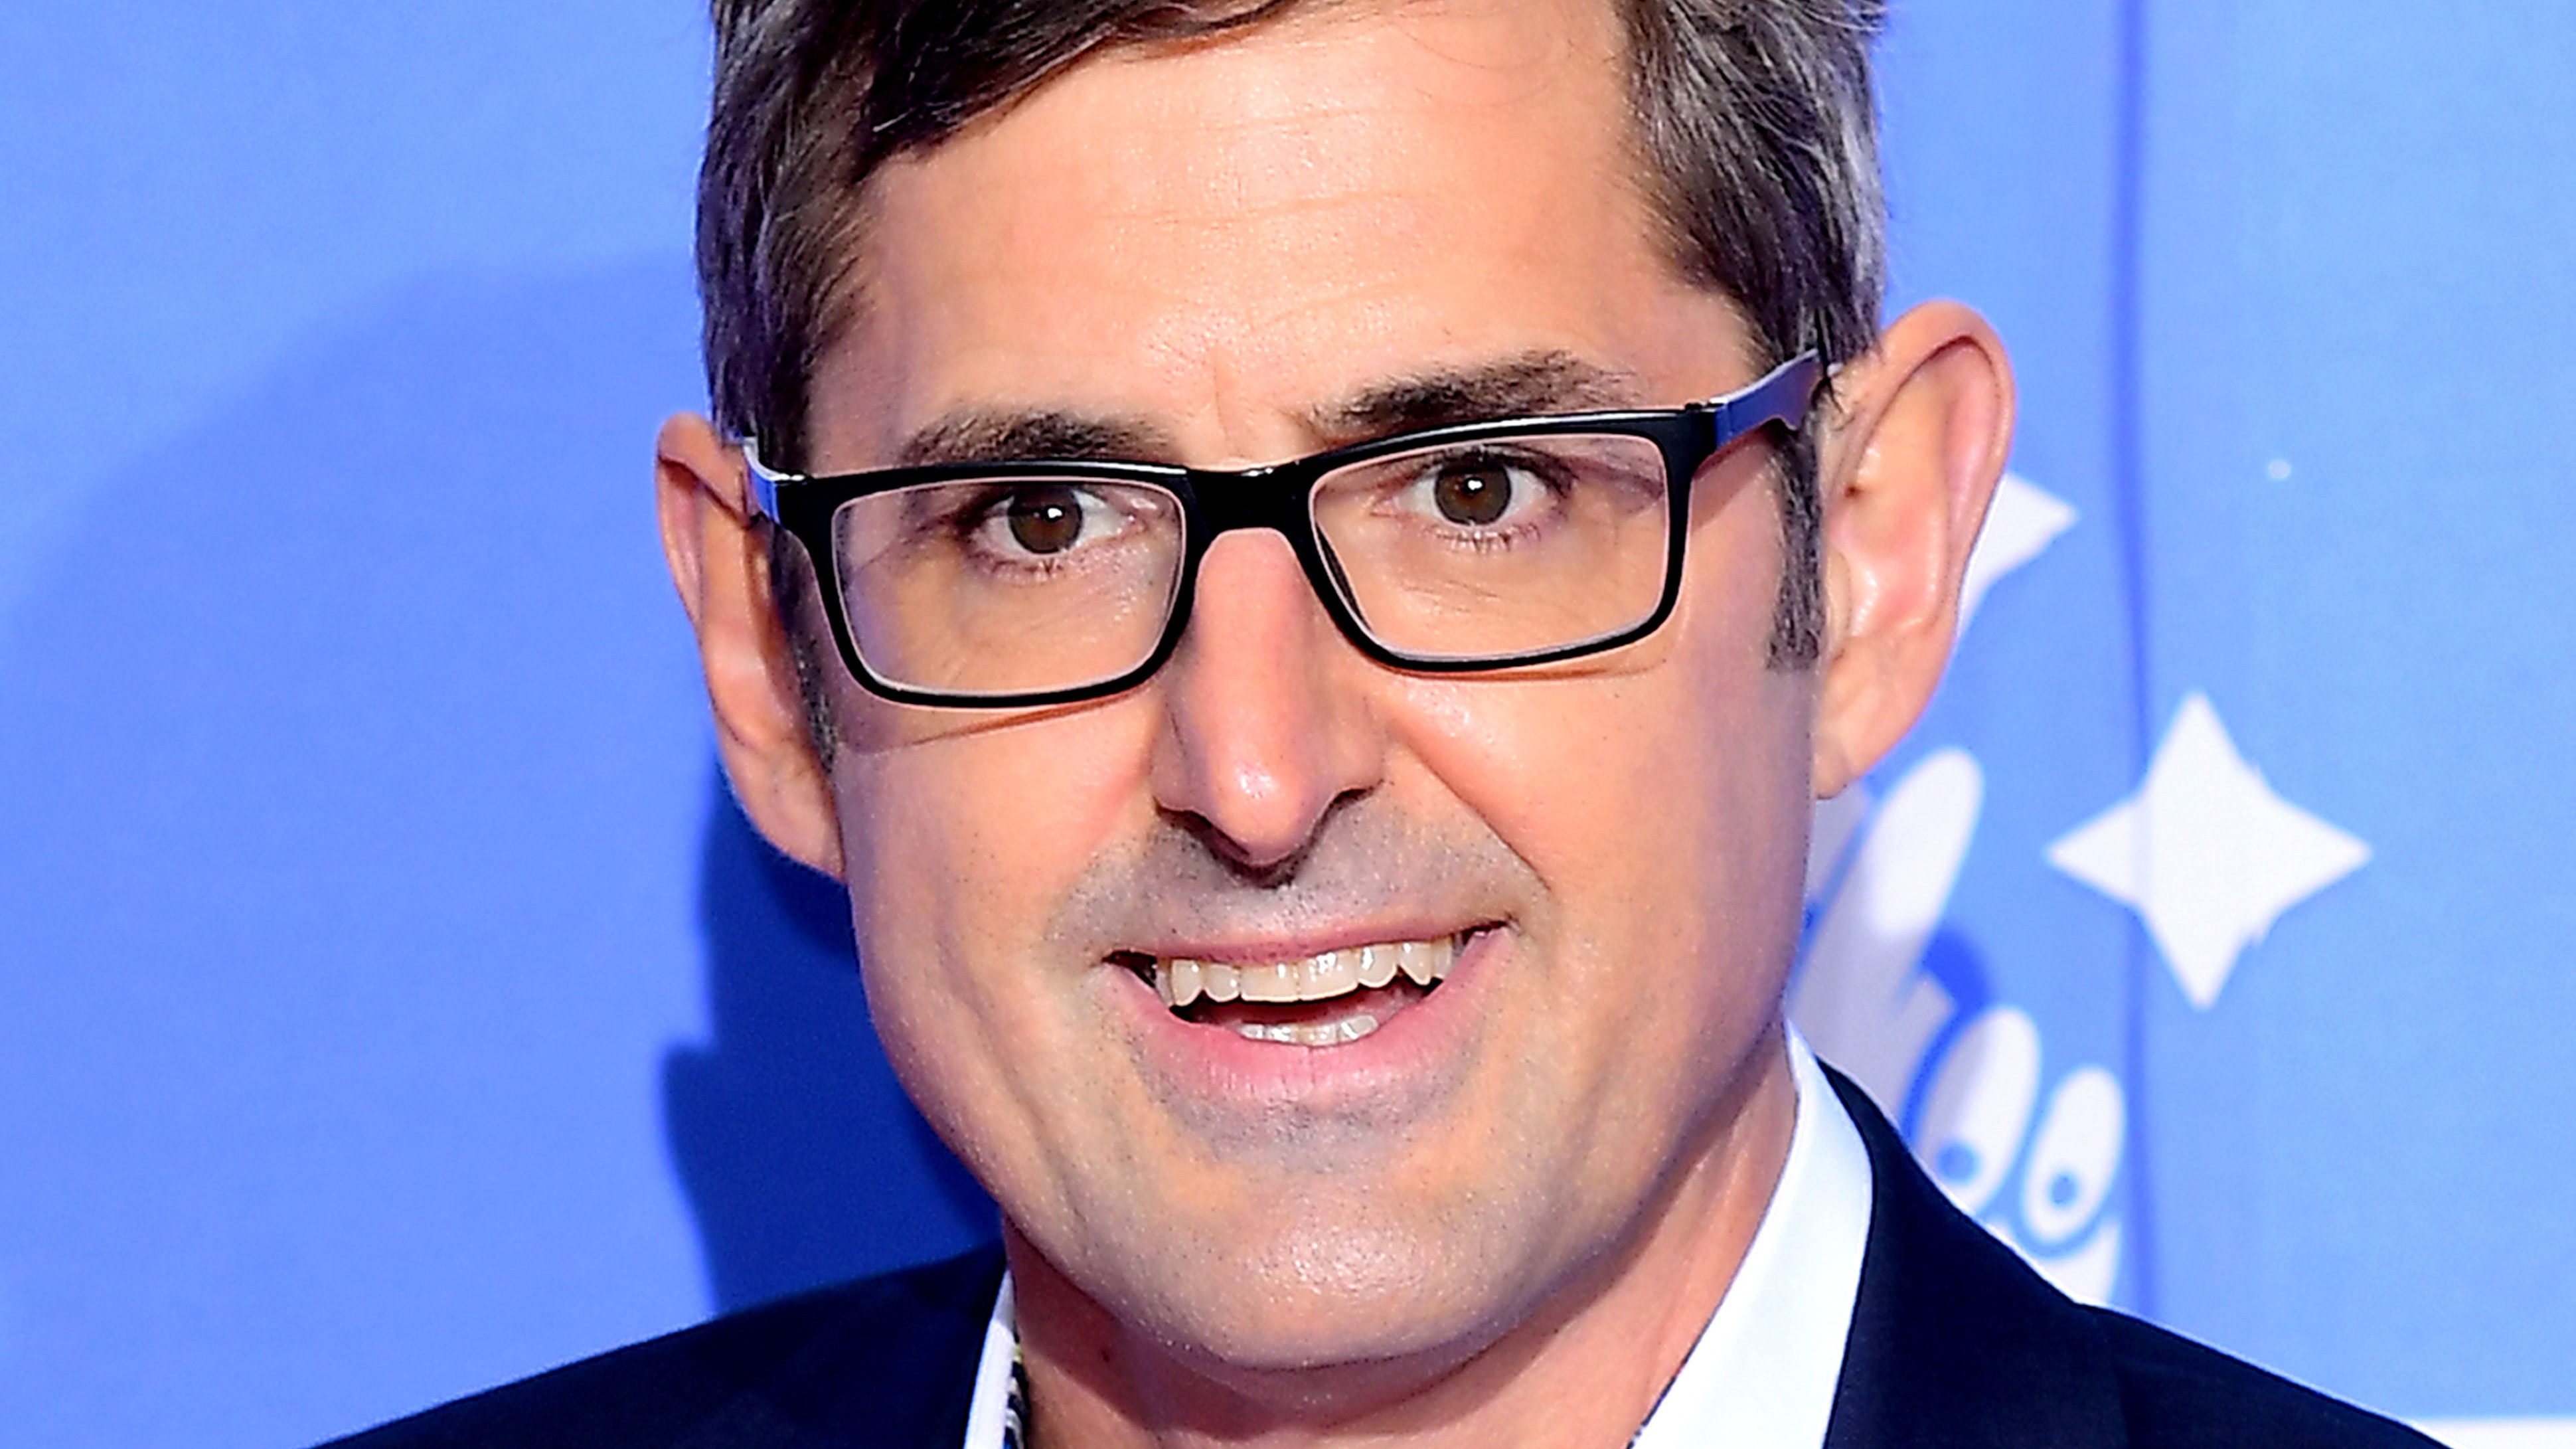 Louis Theroux among Twitter hack targets to highlight security flaw | BT